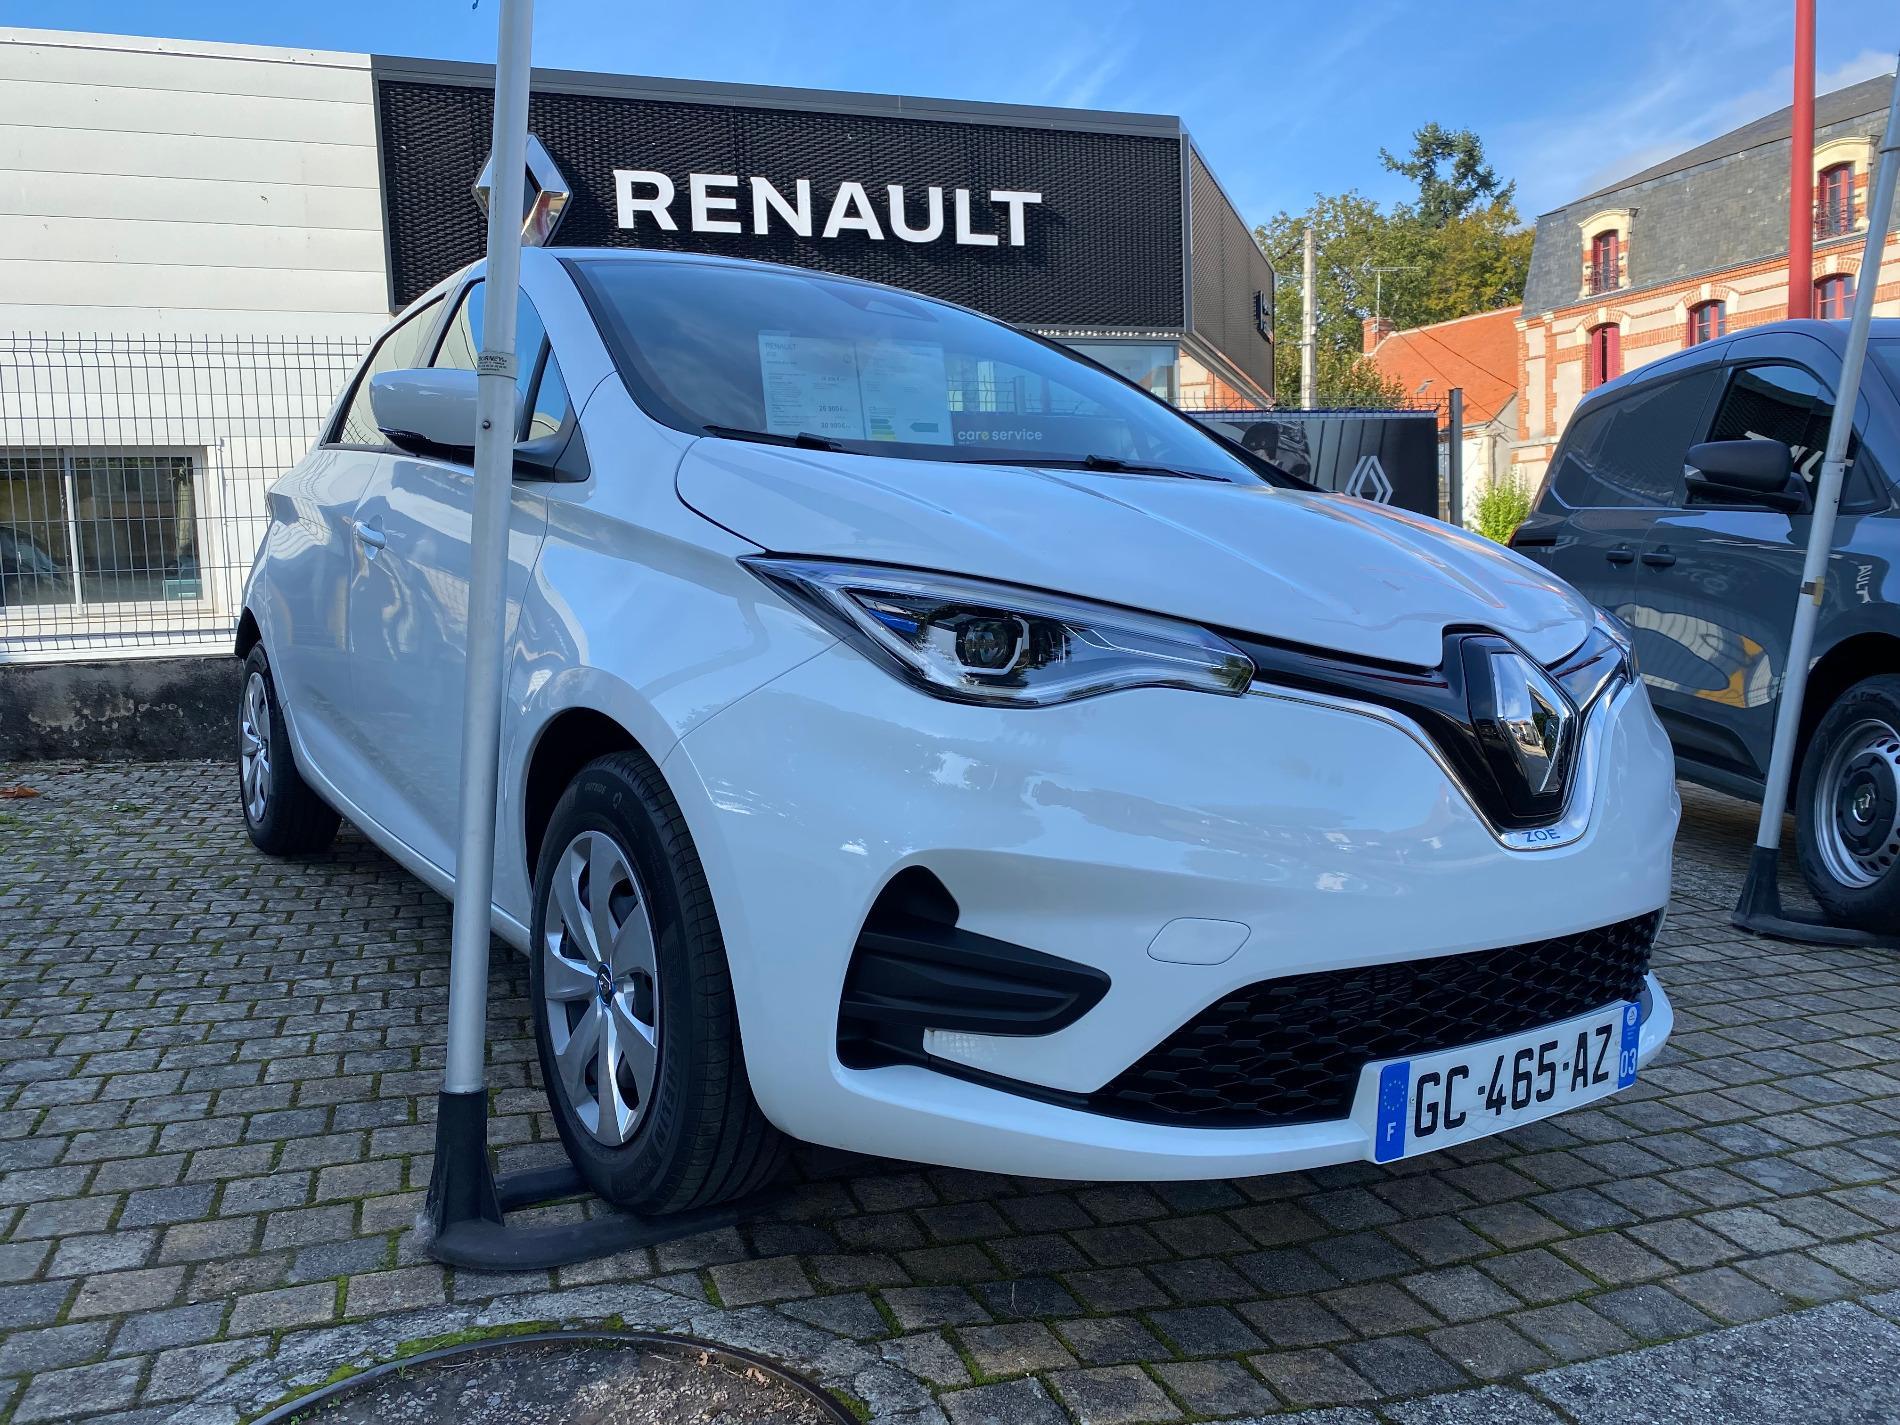 RENAULT R110 BUSINESS